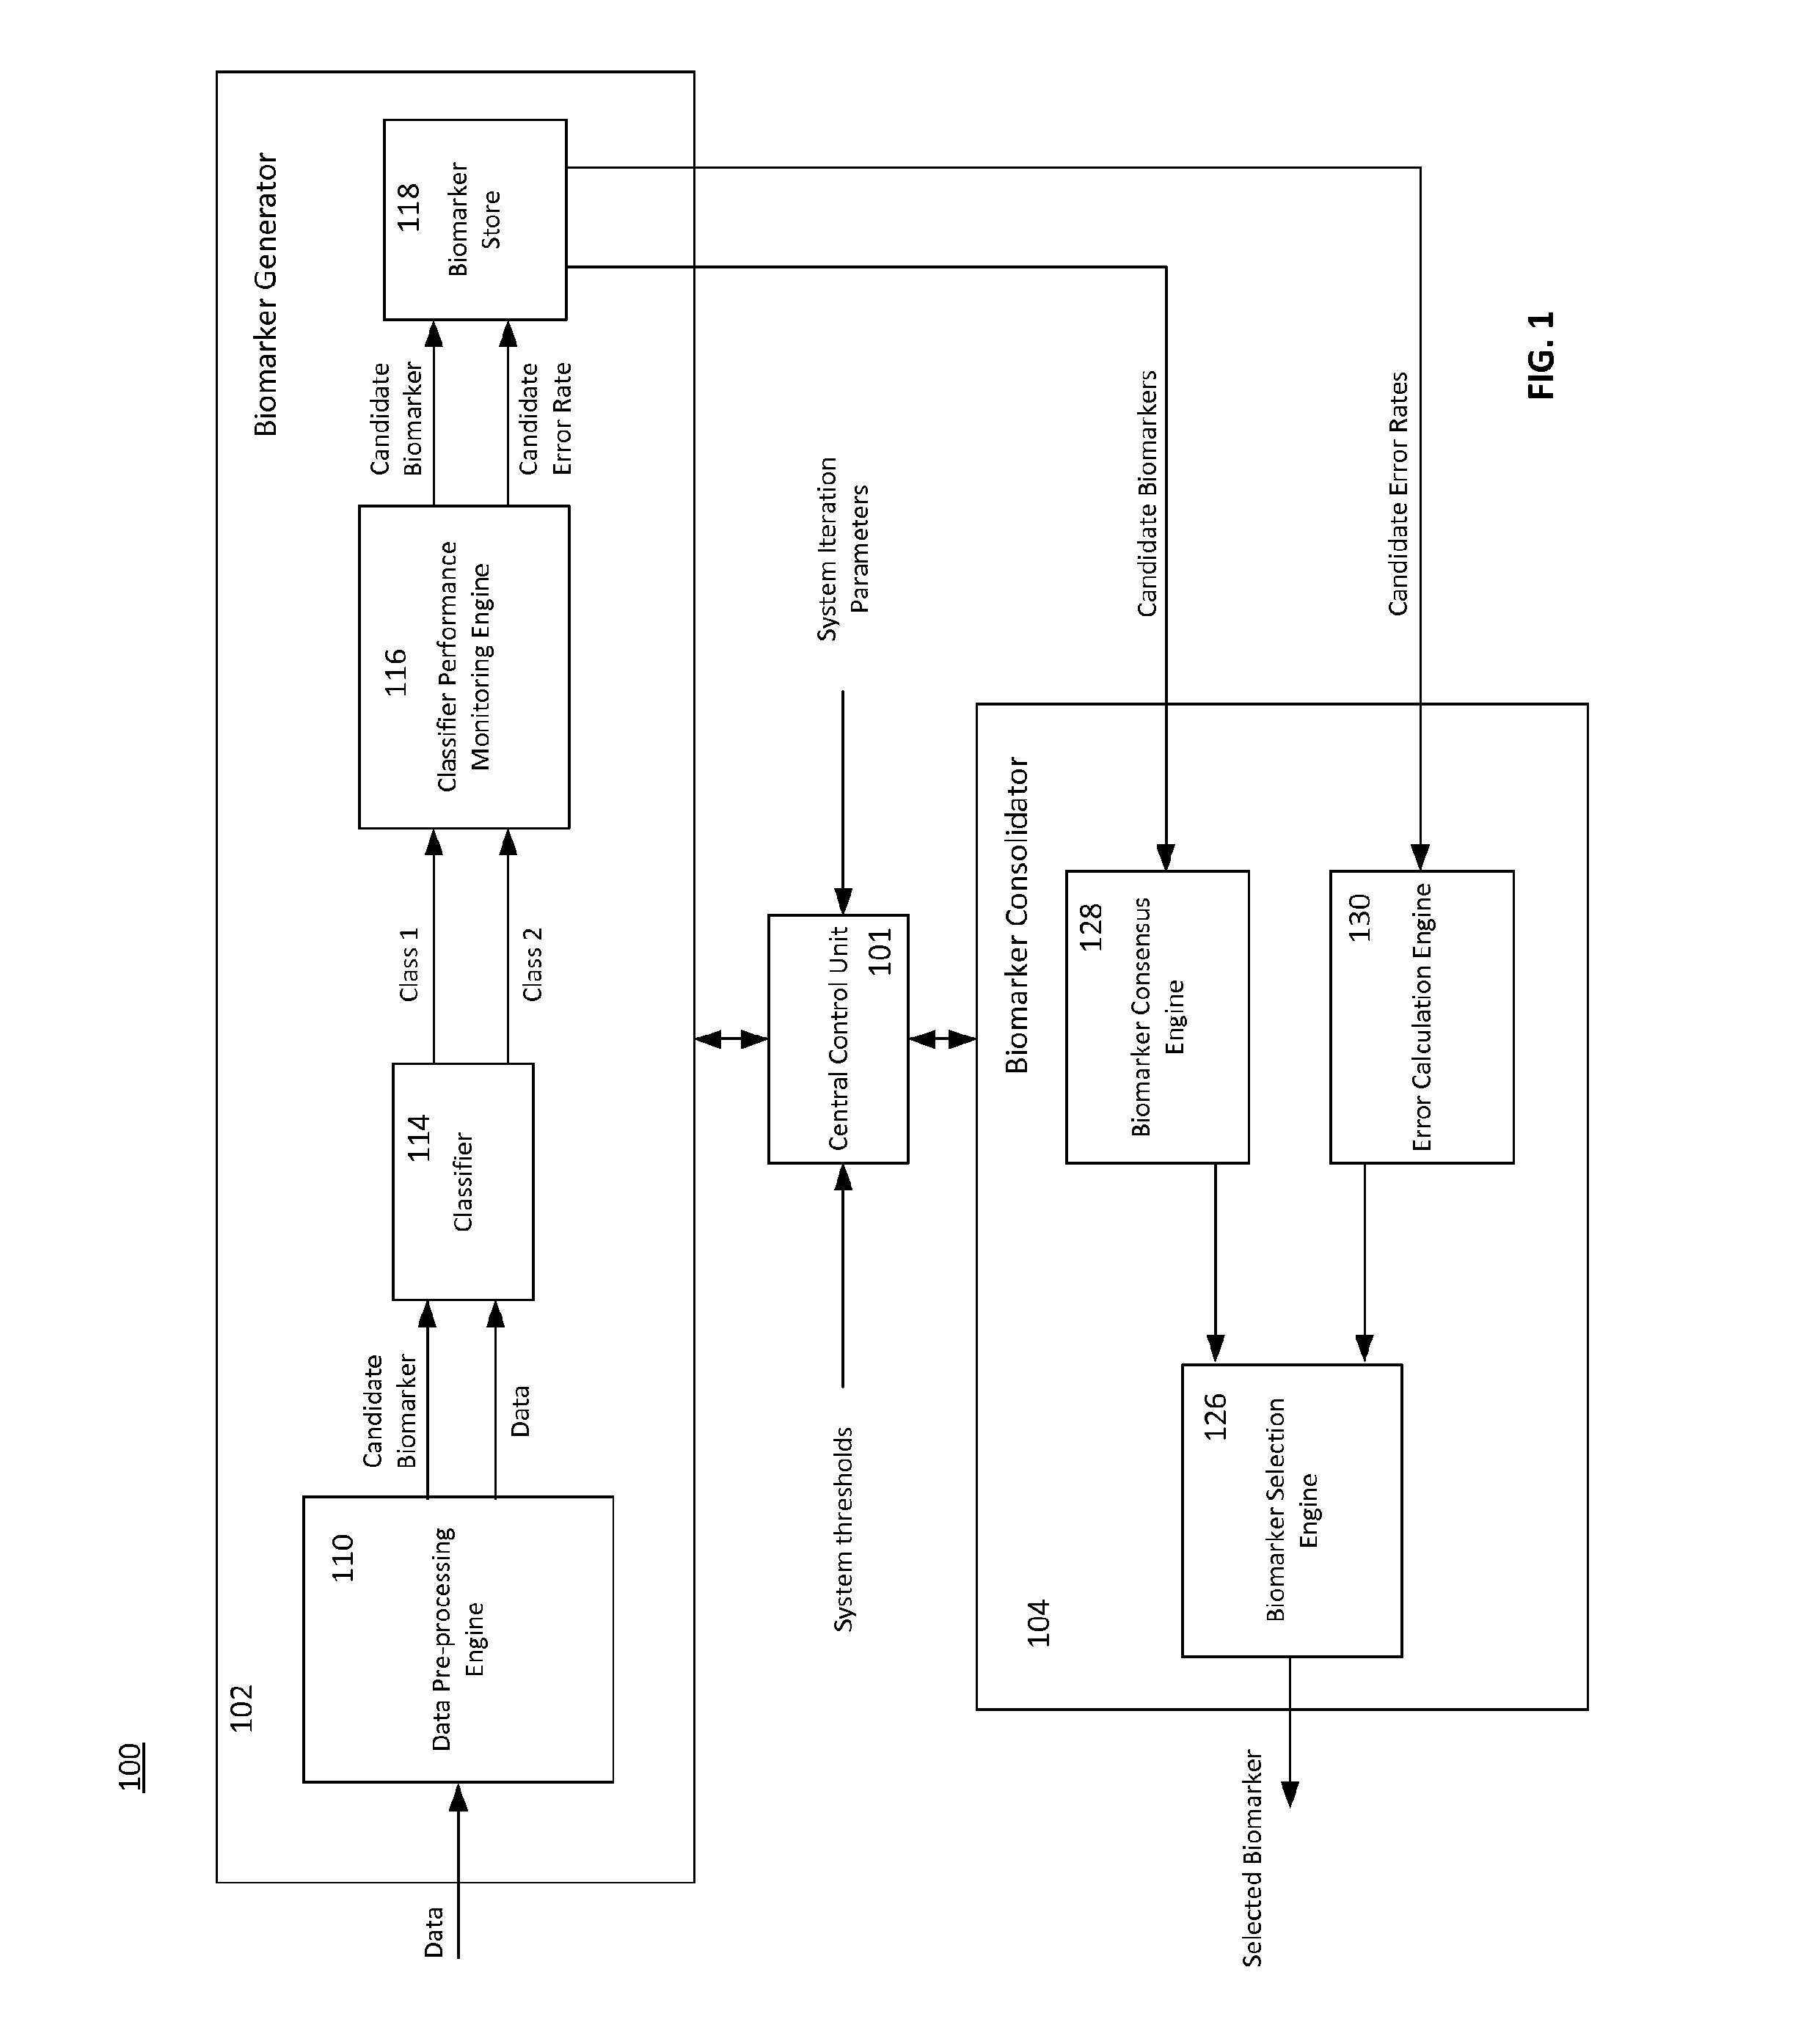 Systems and methods for generating biomarker signatures with integrated dual ensemble and generalized simulated annealing techniques